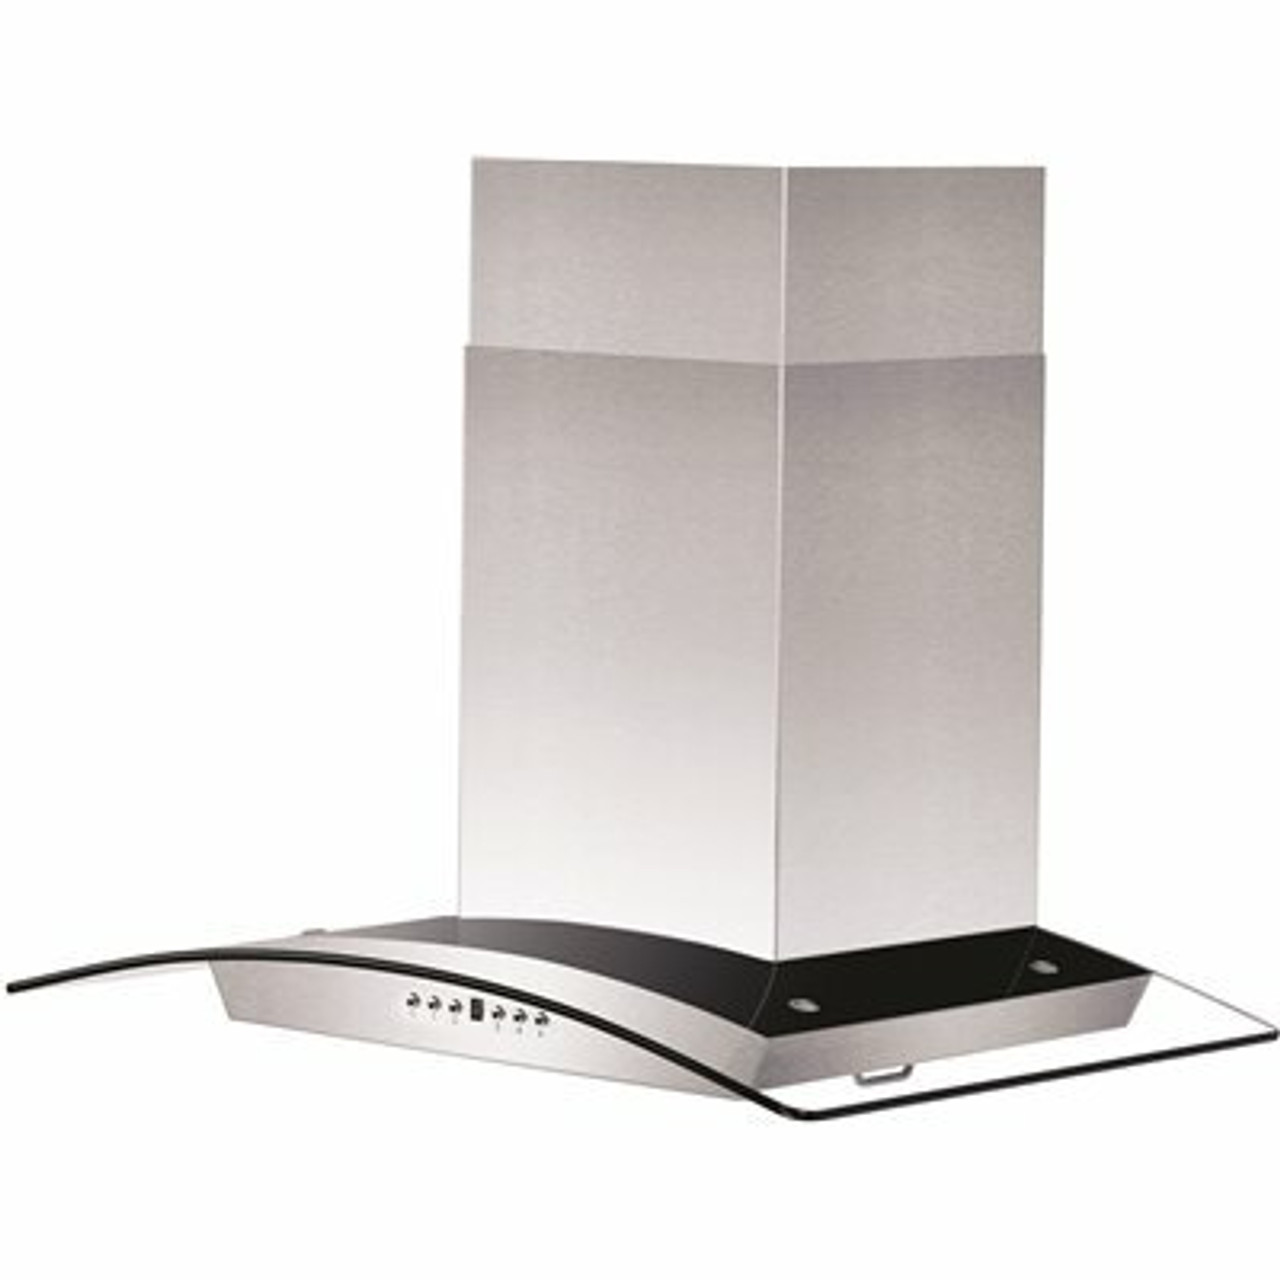 Zline Kitchen And Bath Zline 30 In. Convertible Vent Wall Mount Range Hood In Stainless Steel And Glass (Kz-30)